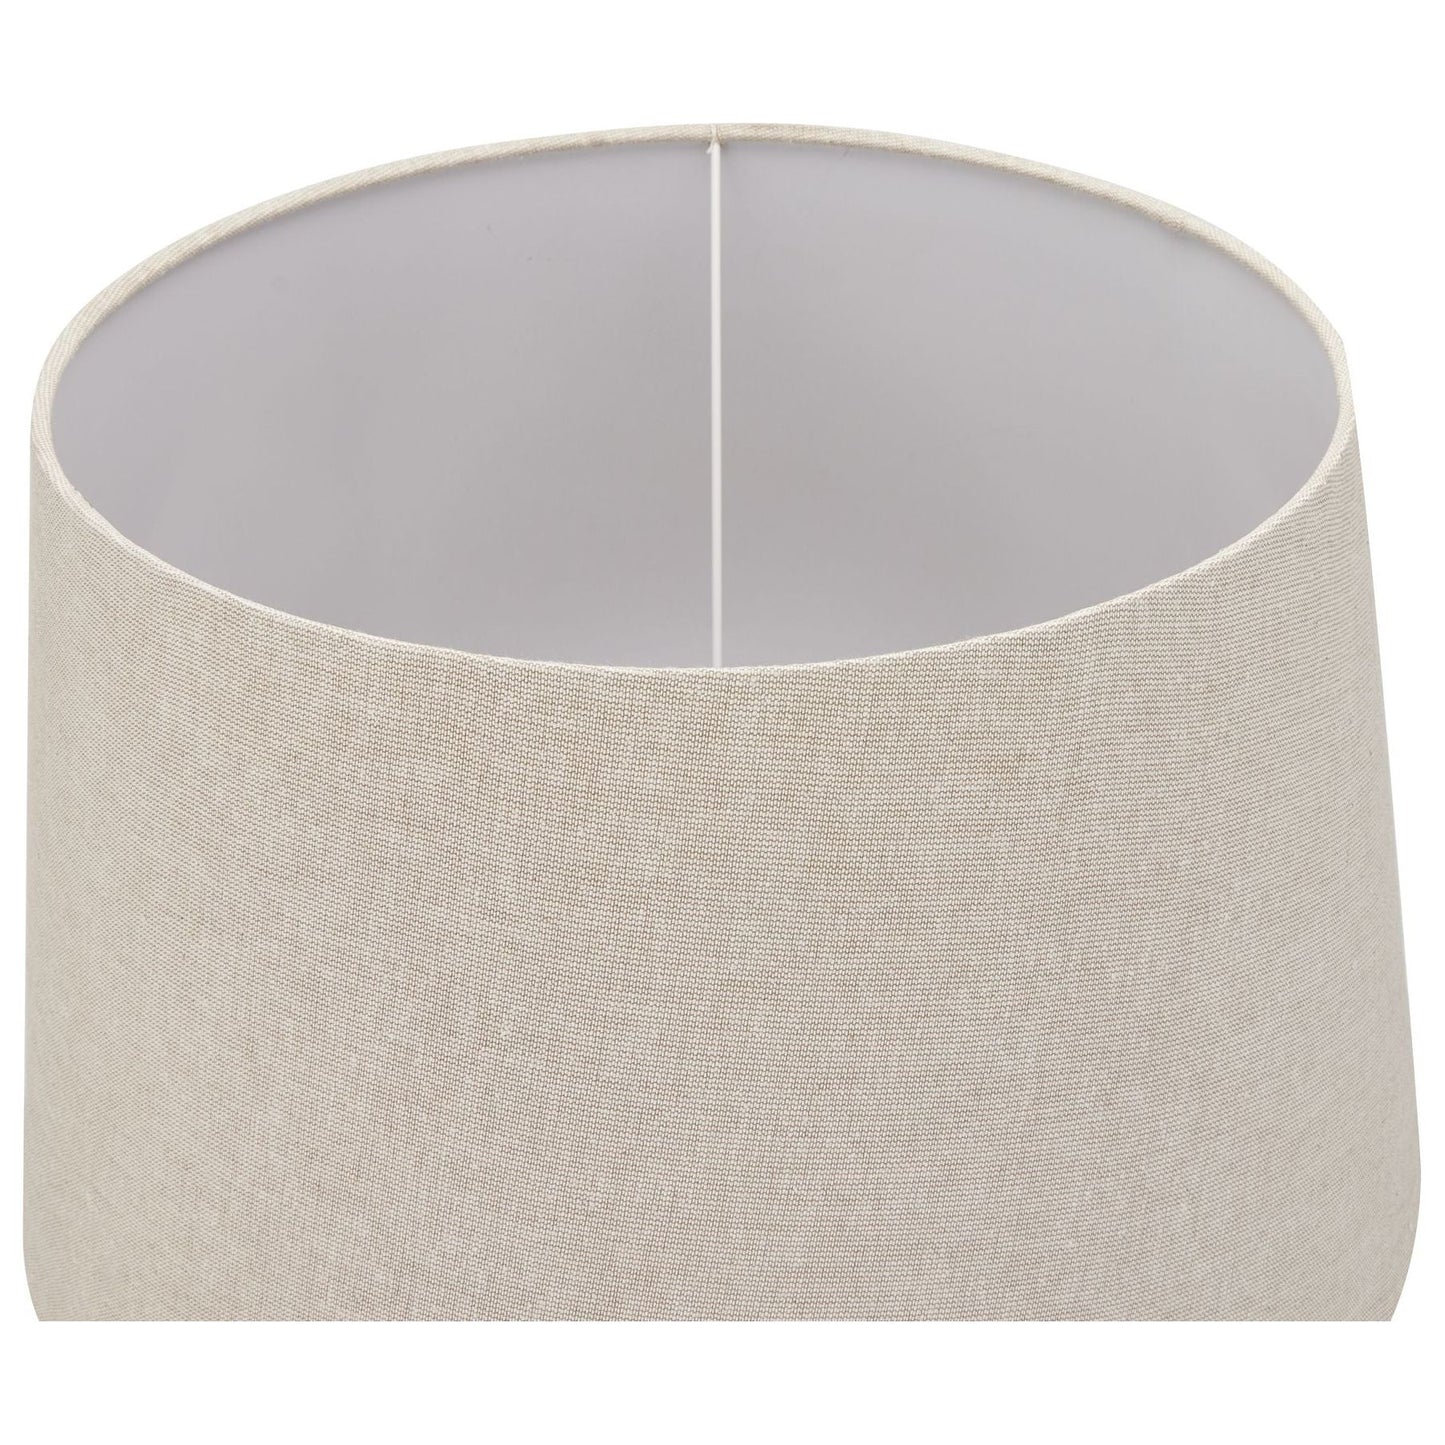 Delaney Natural Wash Urn Lamp With Linen Shade - Ashton and Finch